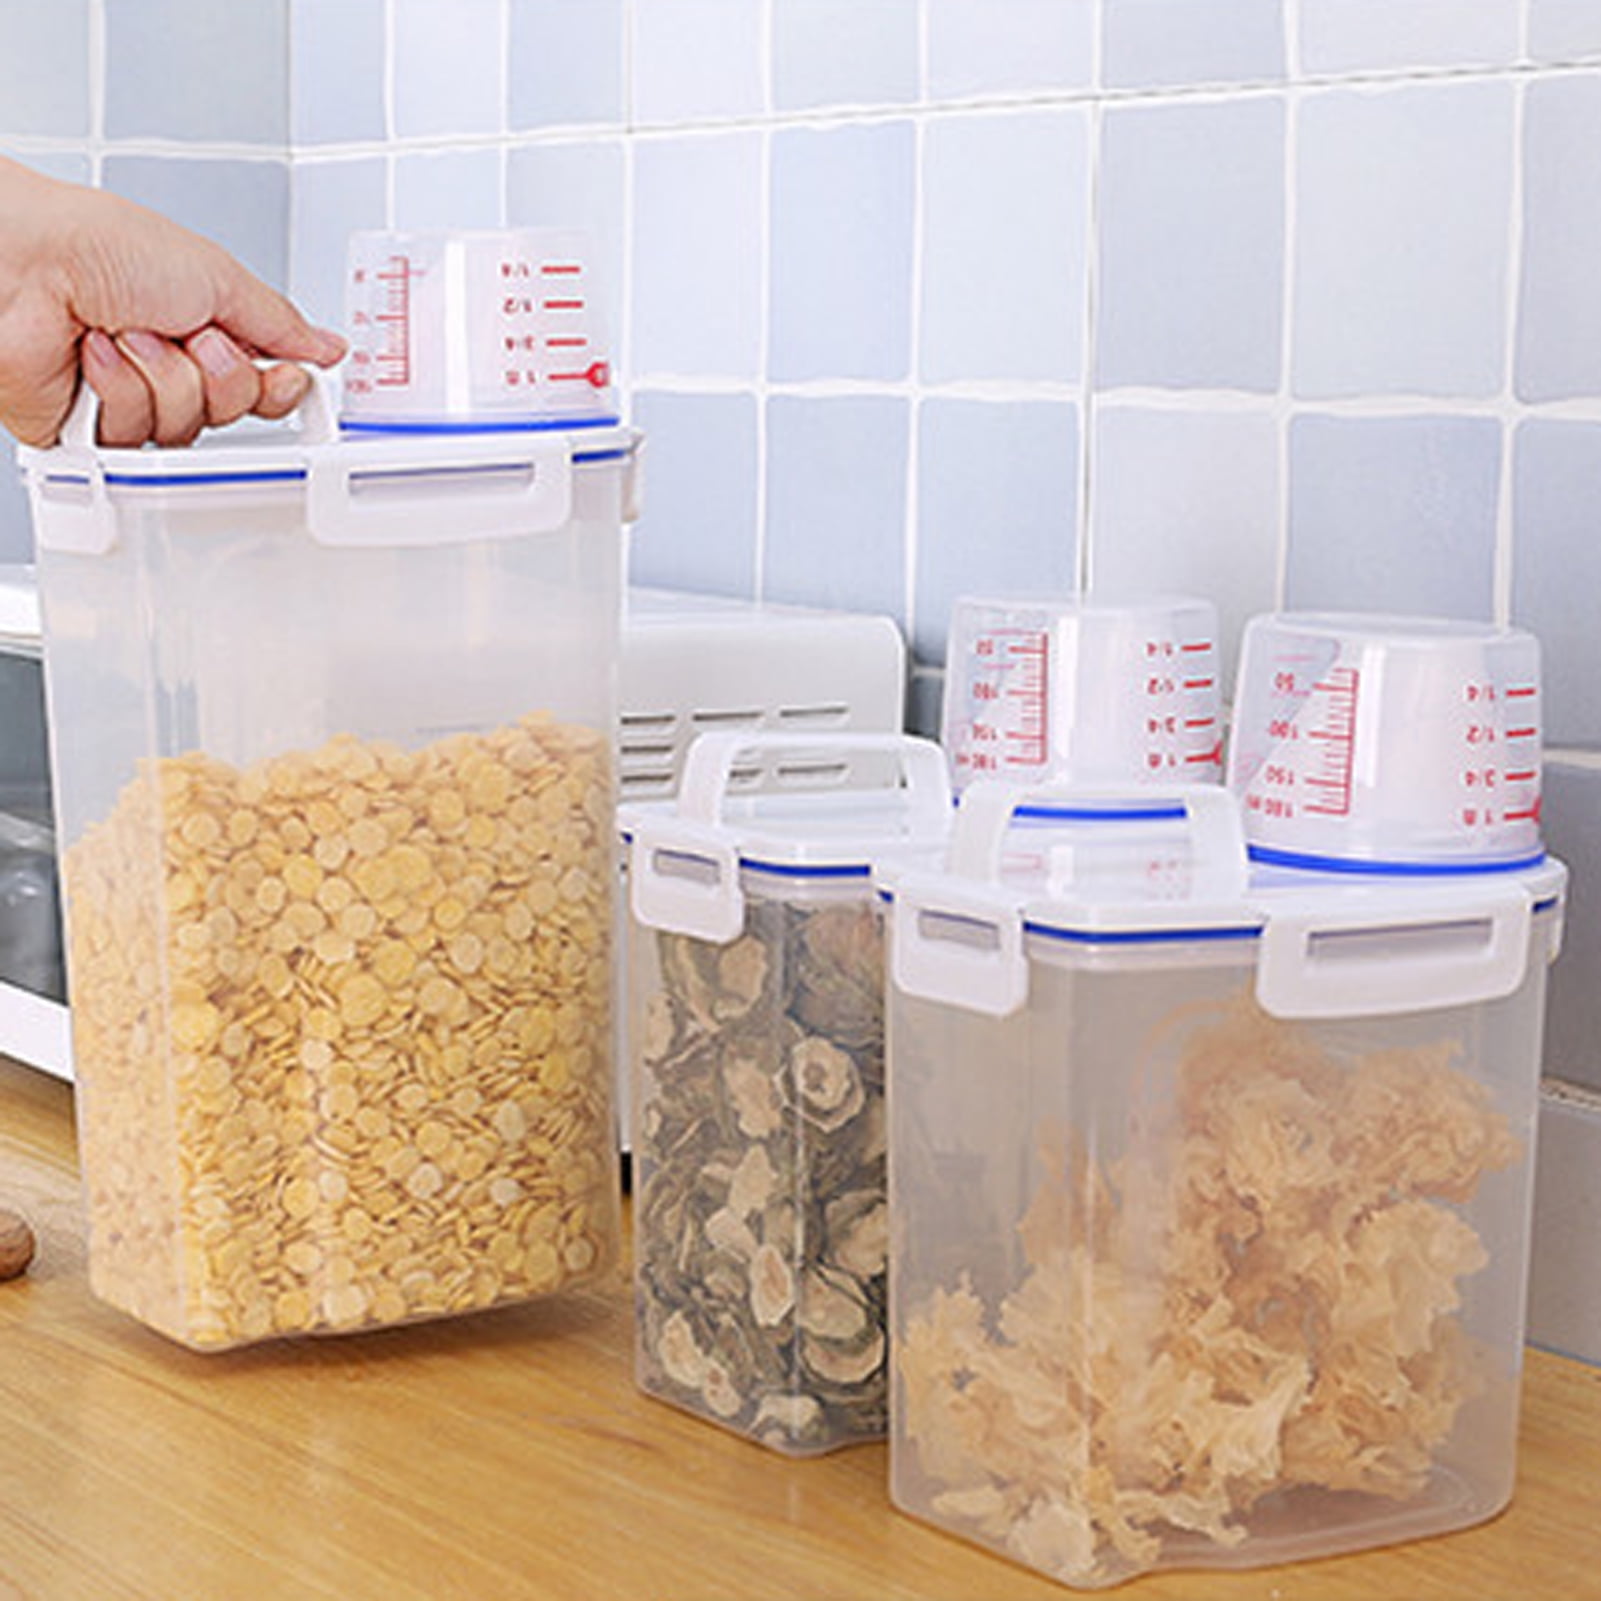 S Baffect Cereal Storage Container Rice Container 5kg Rice Box Airtight Watertight Cereal Container with Wheels Grain Rice Sealed Box Rice Storage Box with Measuring Cup 